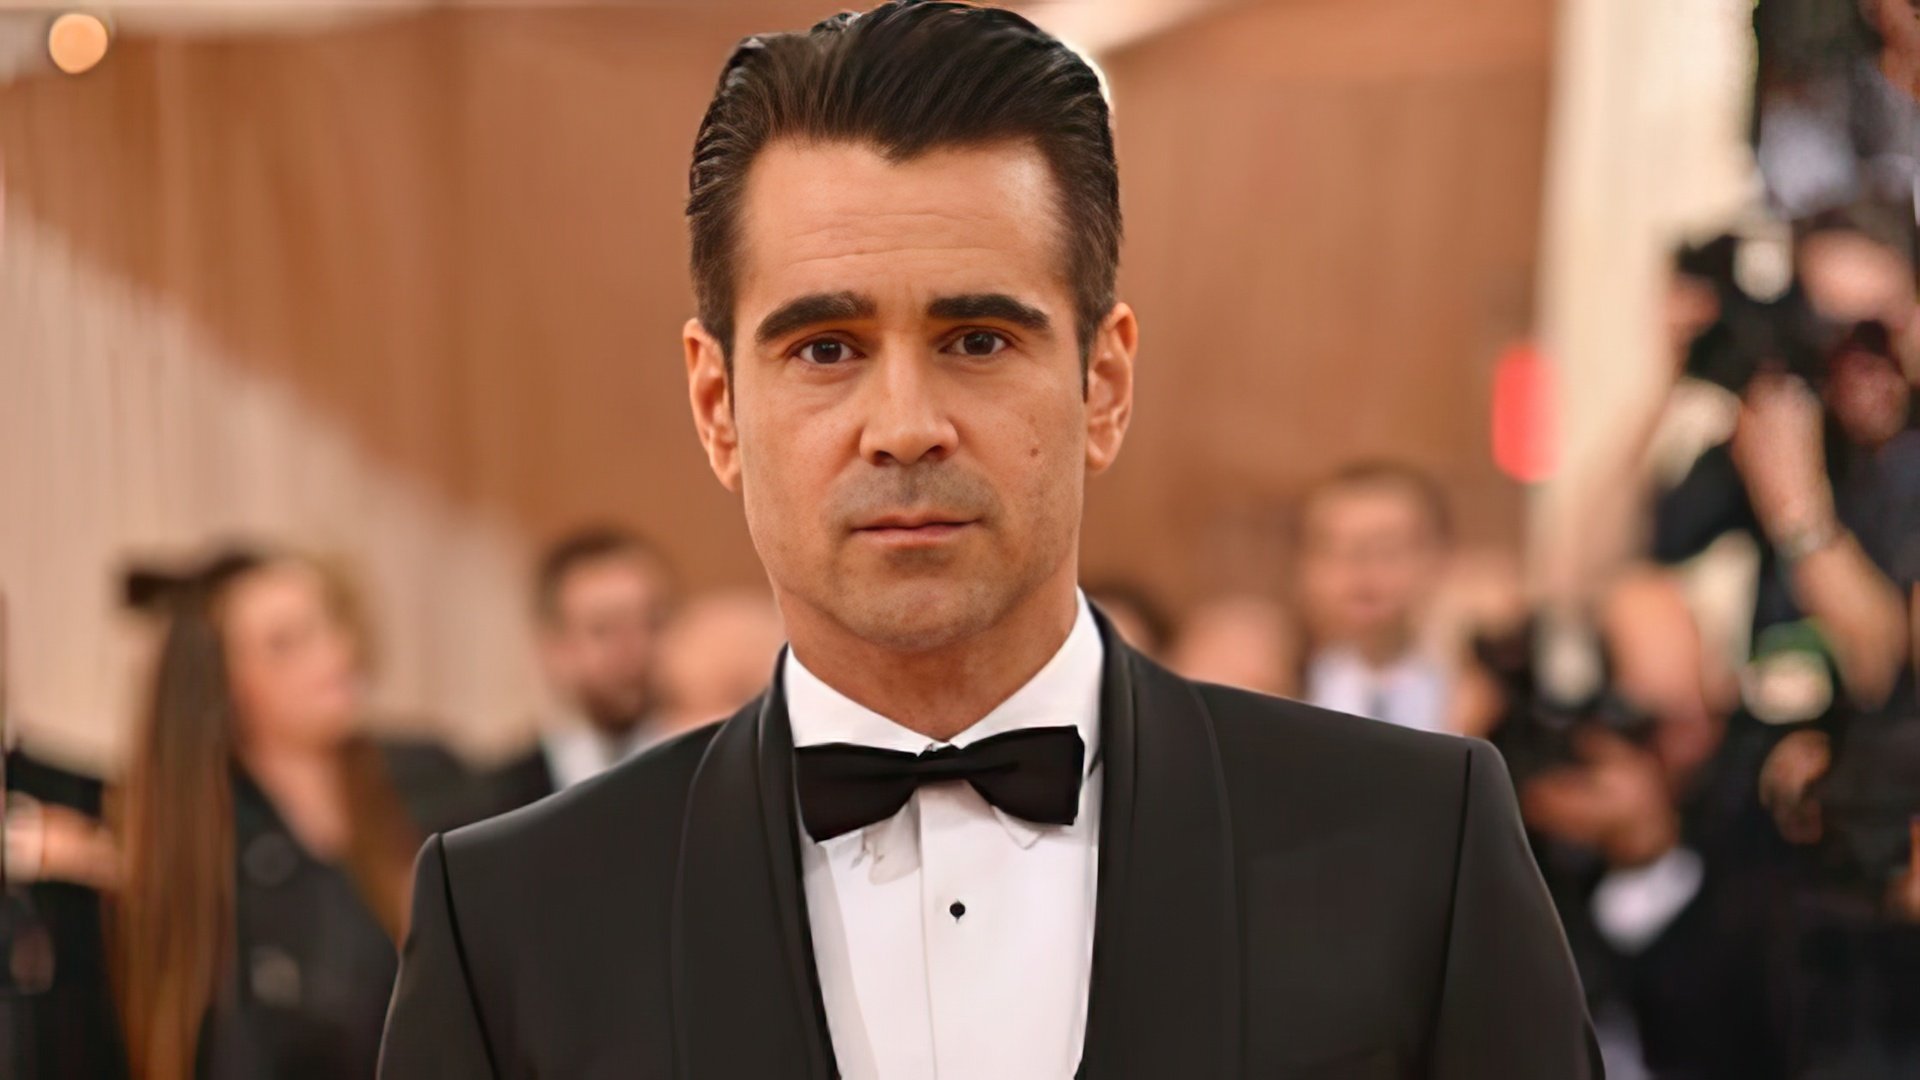 In 2016, Colin Farrell played in the new Harry Potter-verse movie